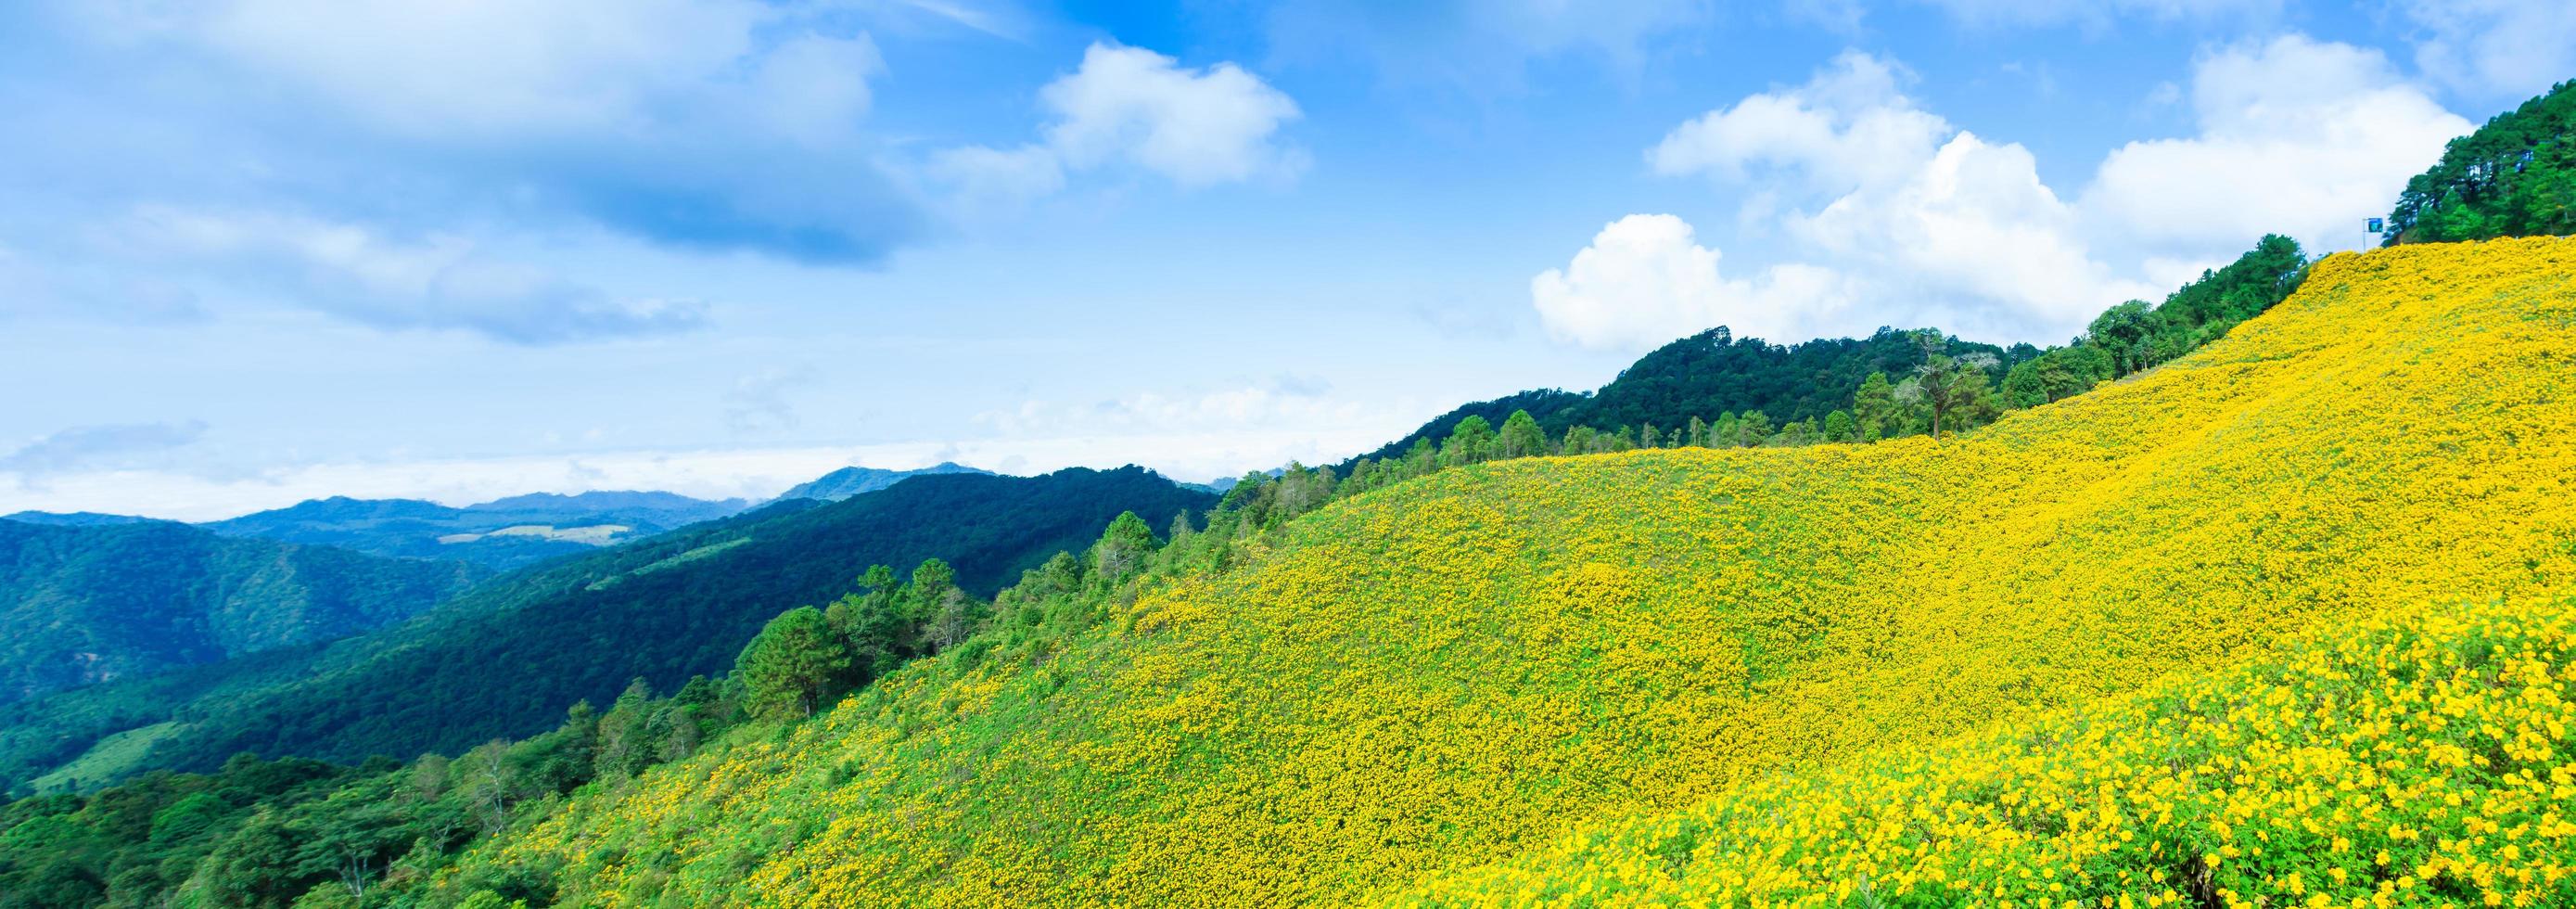 Landscape in Thailand with yellow flowers photo